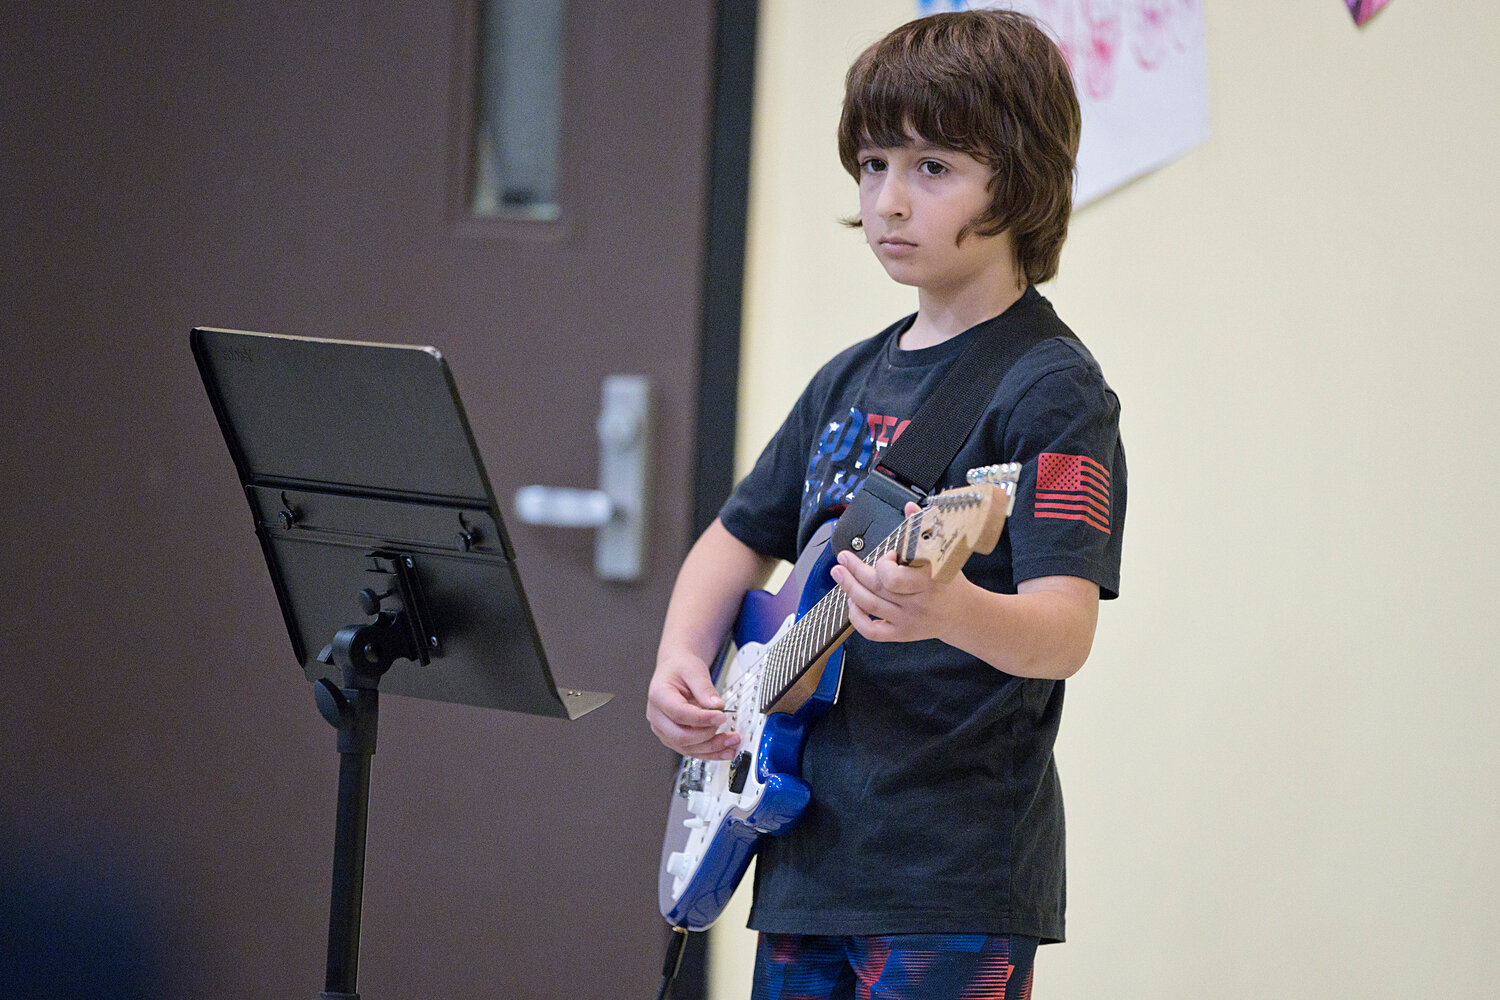 Hugh Cole student, Nicholas Mello, plays the National Anthem on electric guitar during Hugh Cole's Memorial Day assembly.